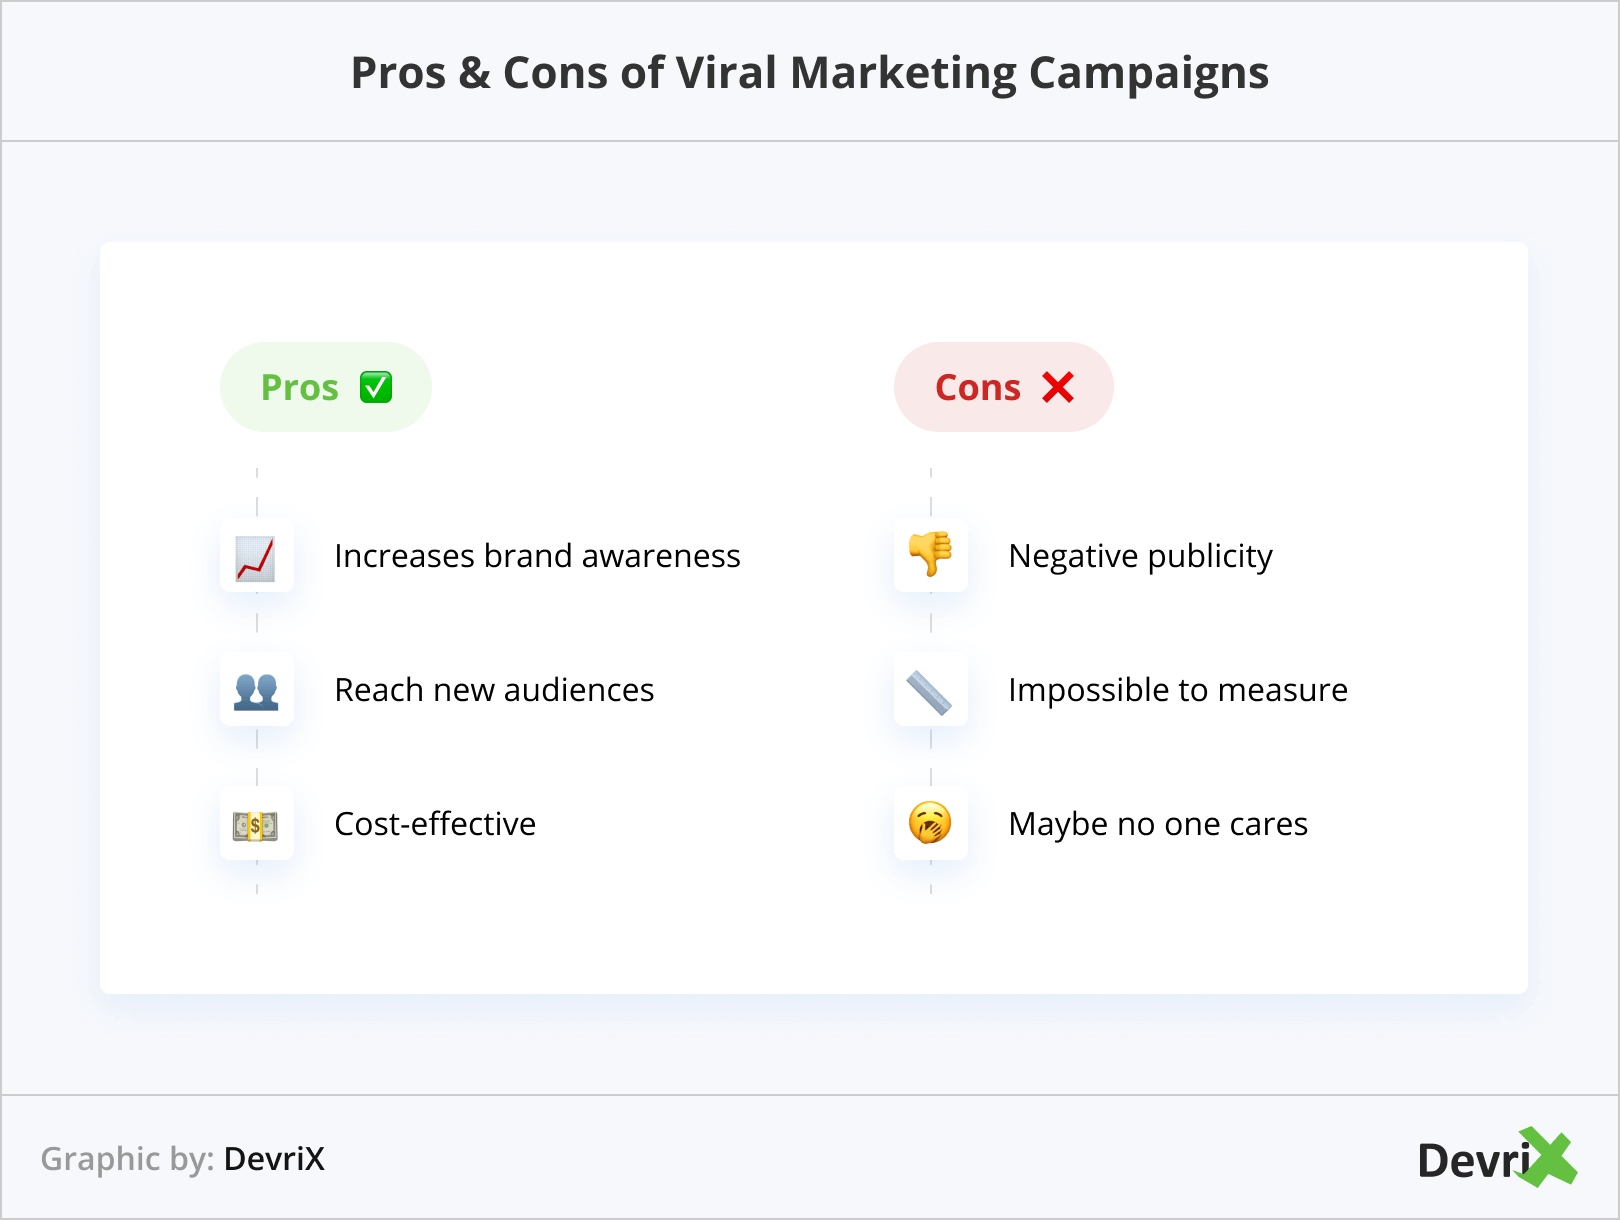 Pros & Cons of Viral Marketing Campaigns